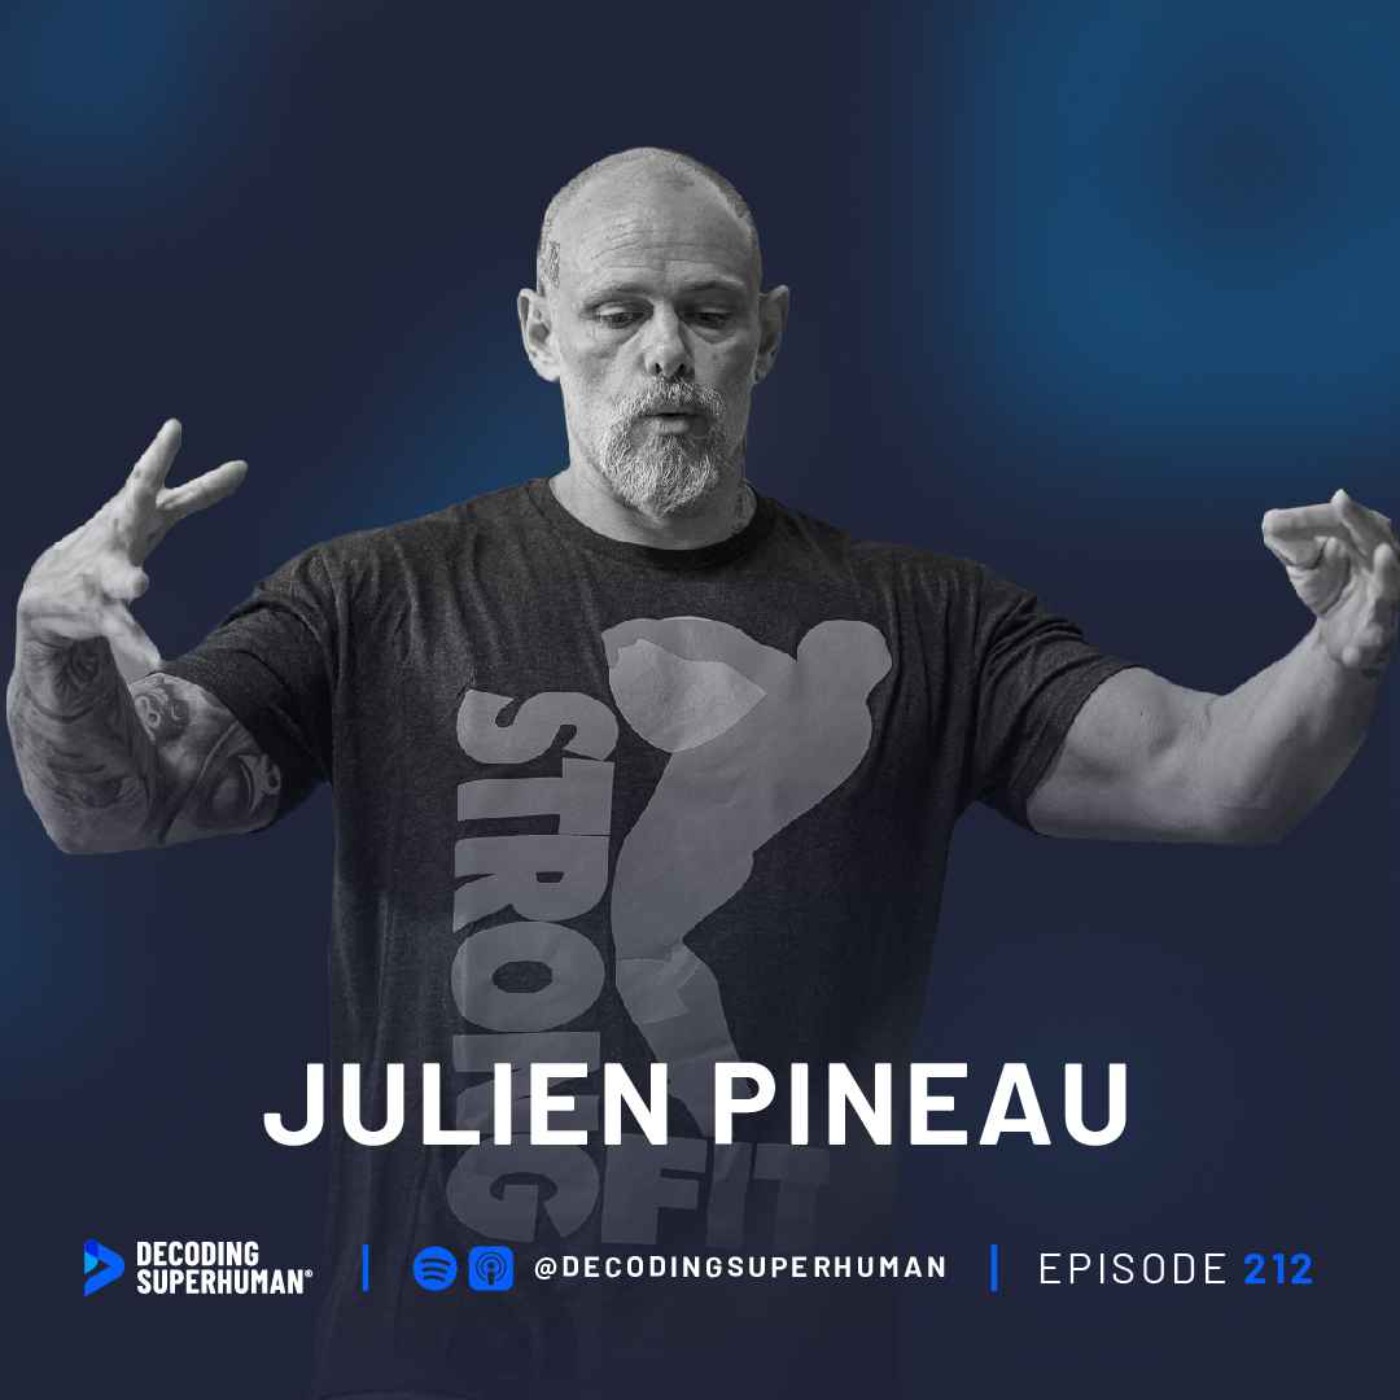 Julien Pineau: Q Training, Sprinting, and Improving Your Mental Game with Exercise